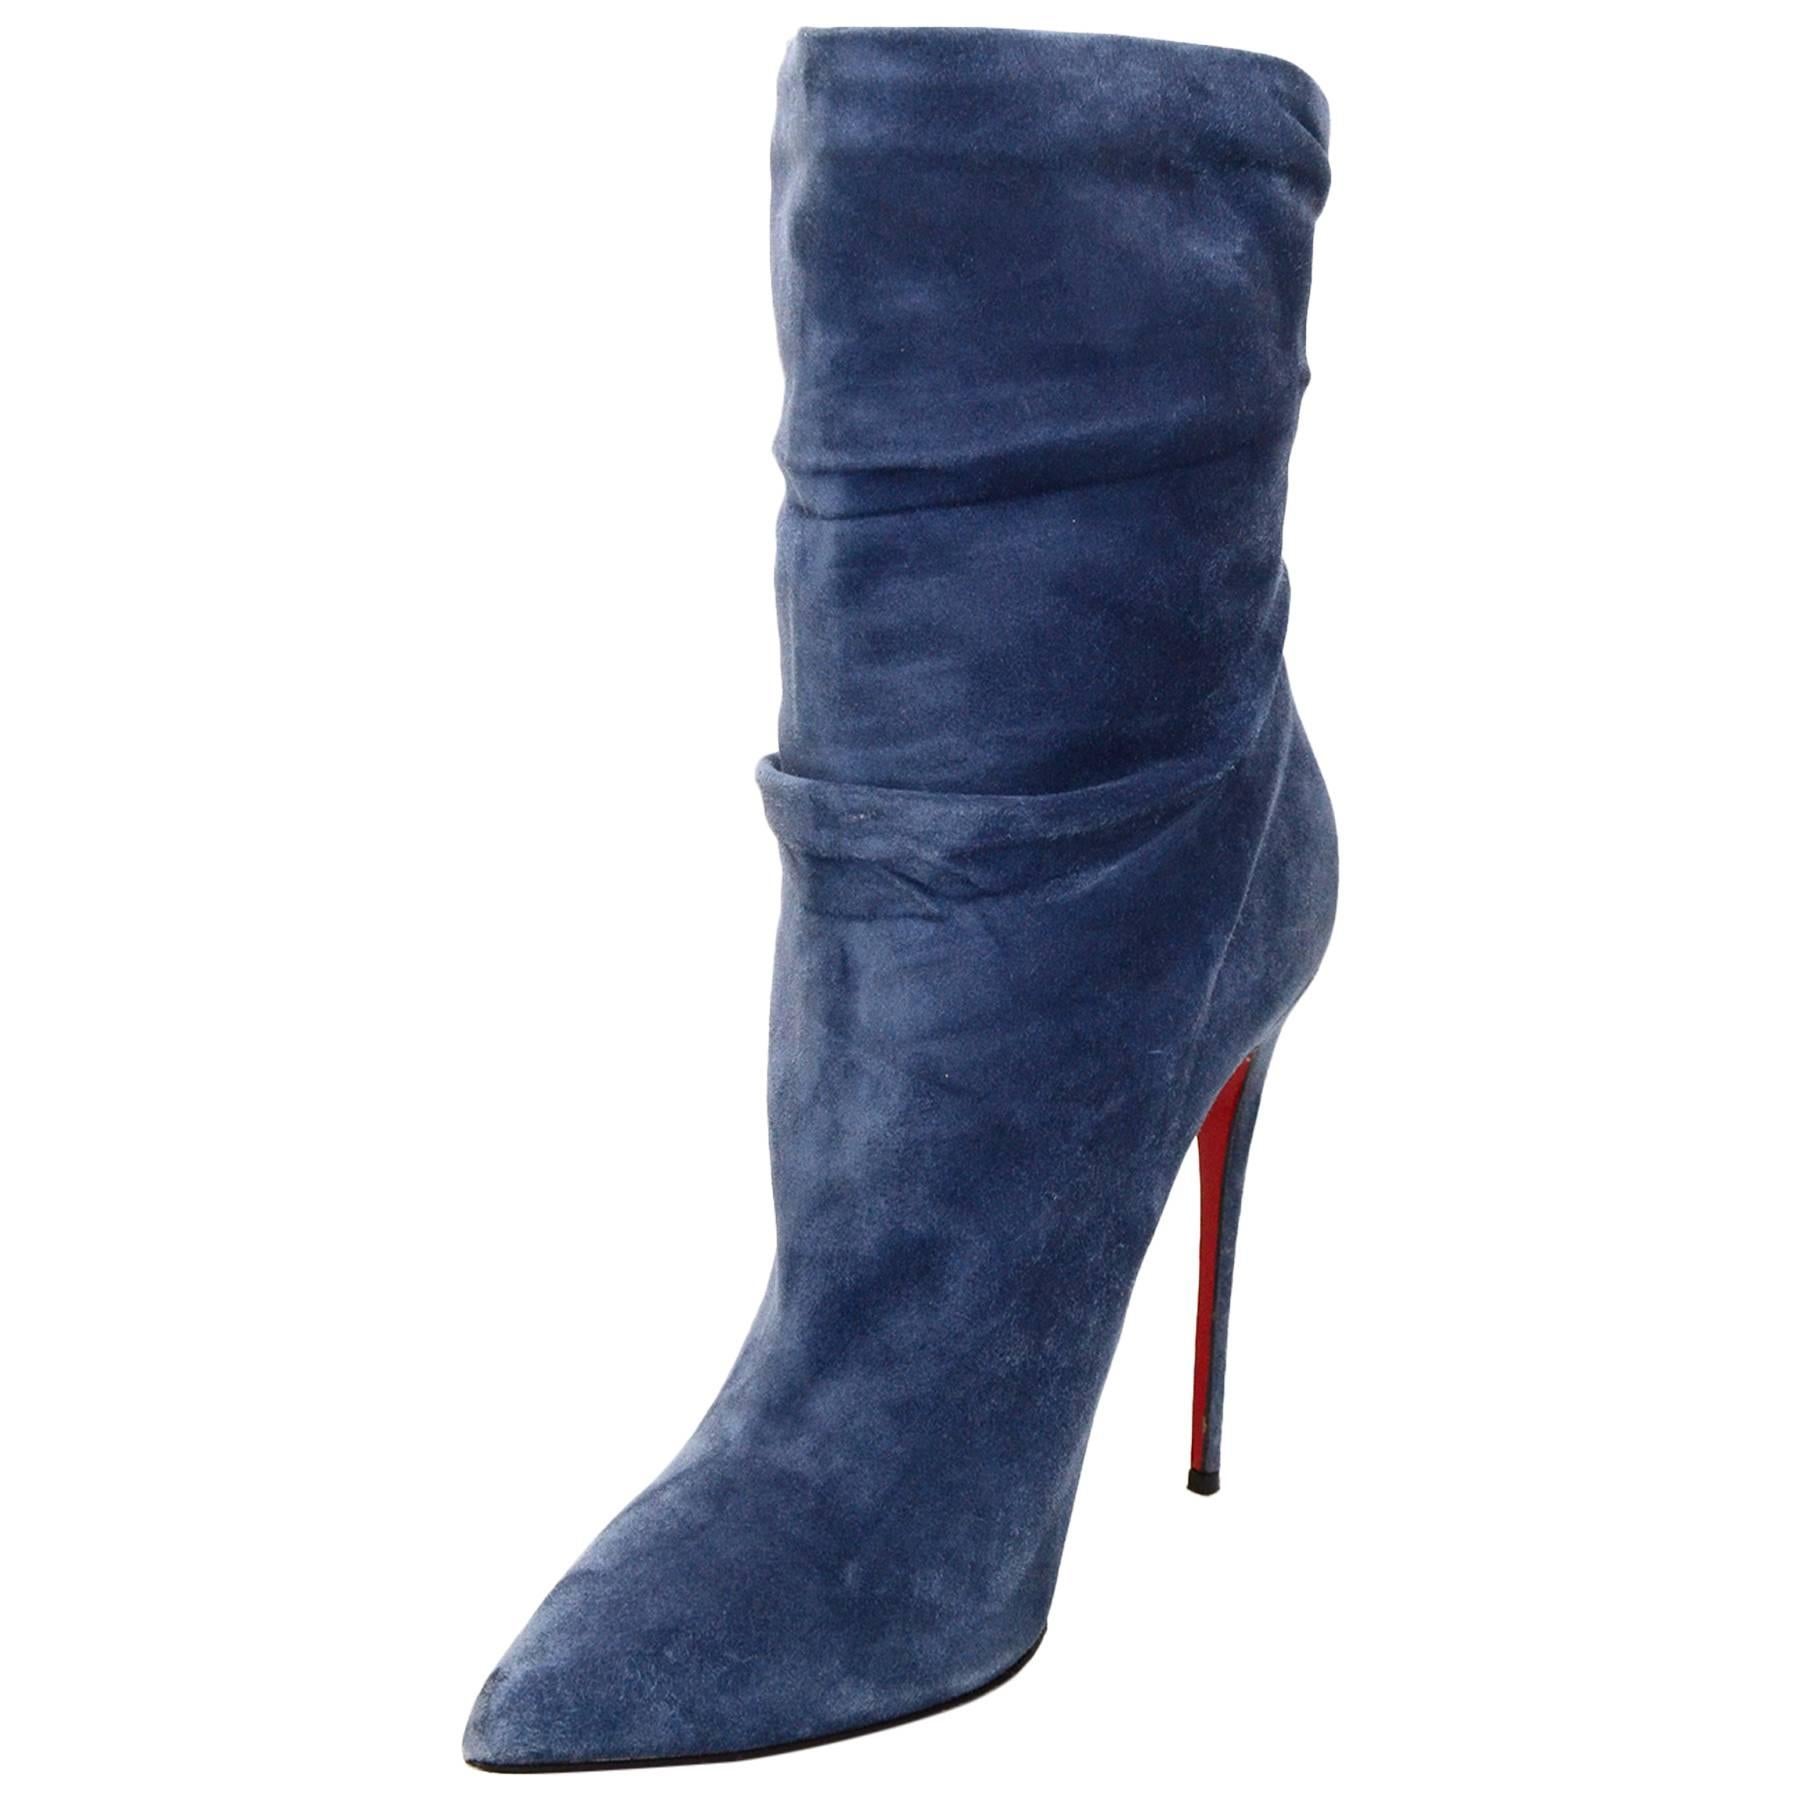 Christian Louboutin Blue Suede Short Ruched Boots sz 41 w/DB